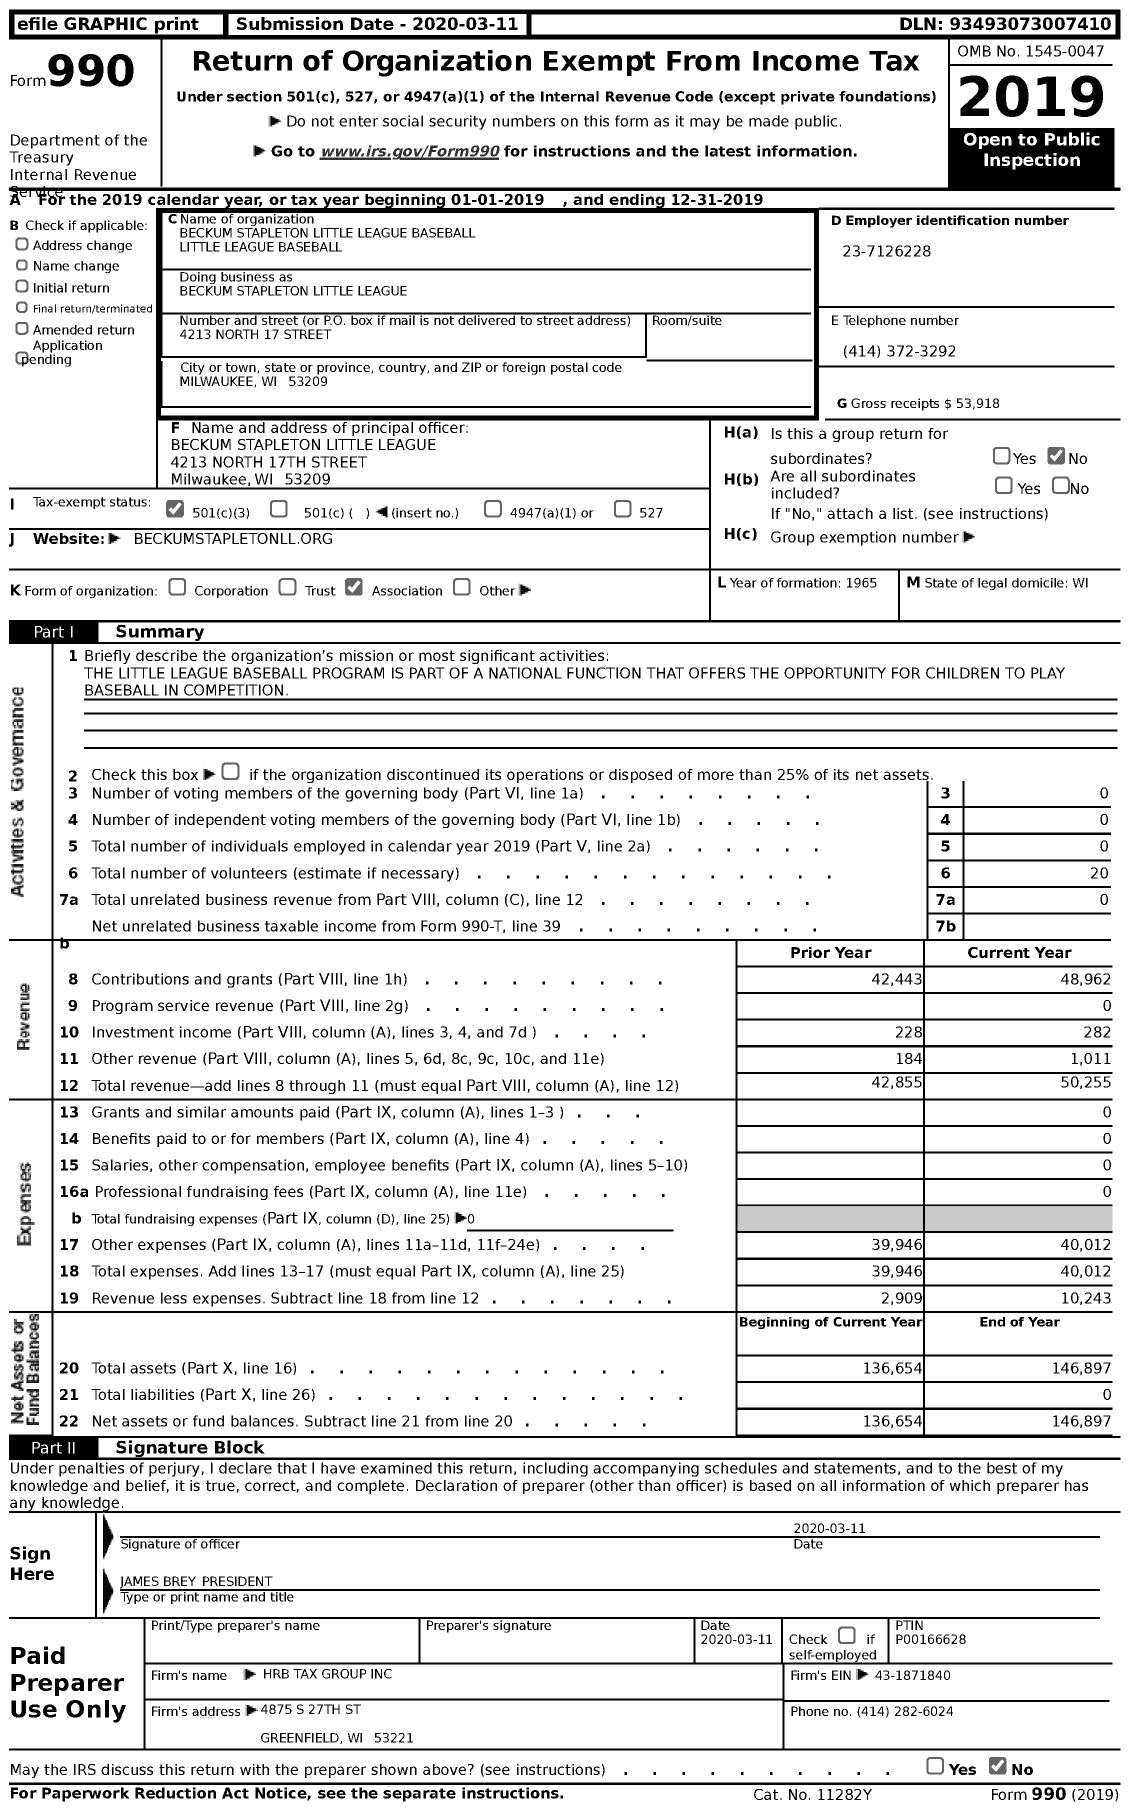 Image of first page of 2019 Form 990 for Beckum Stapleton Little League